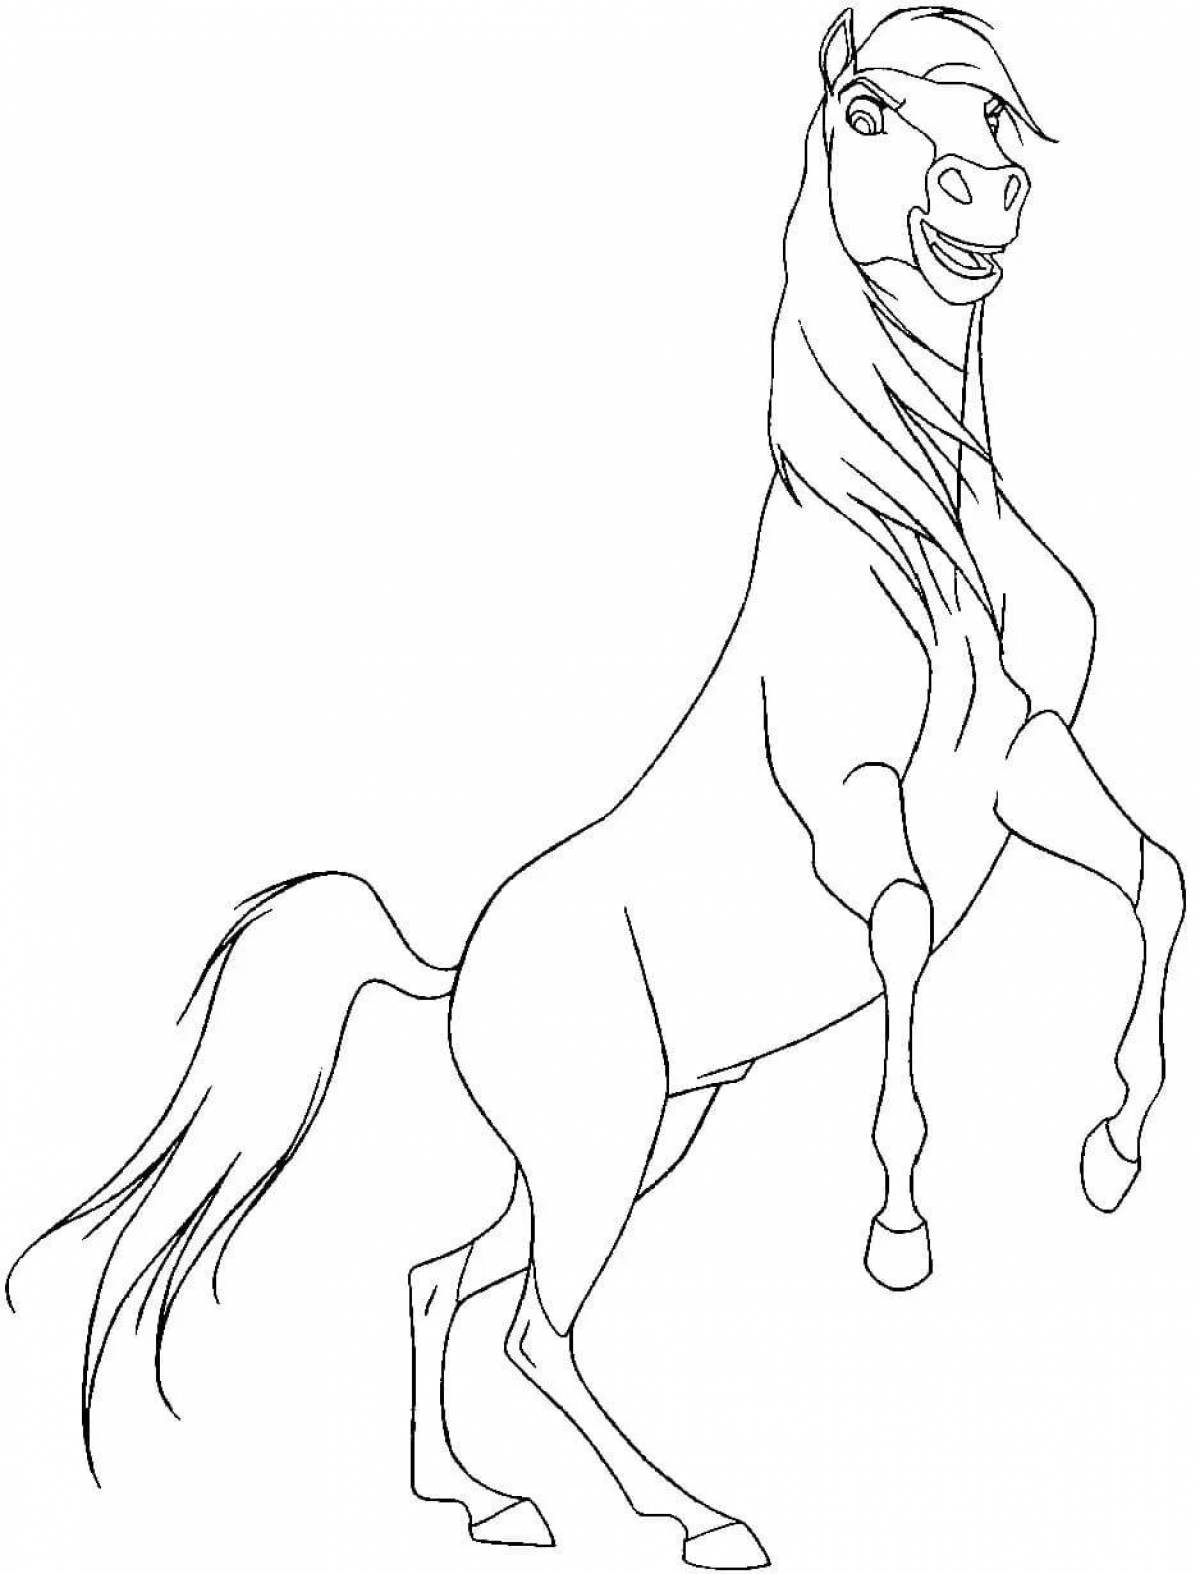 Coloring page greeting spiritist defiant